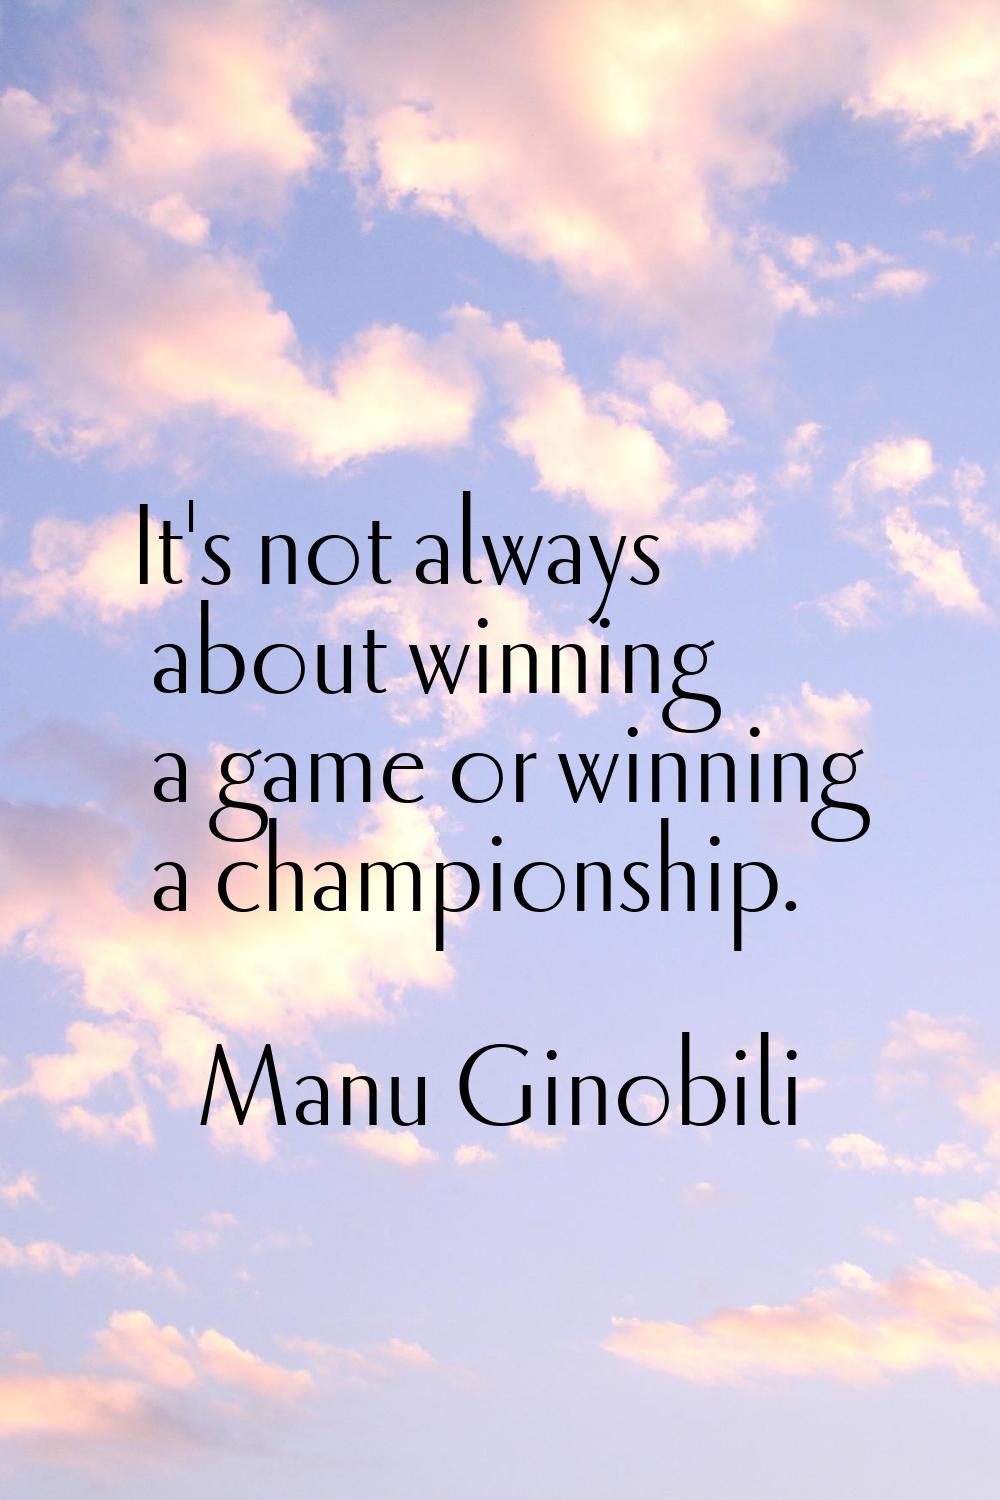 It's not always about winning a game or winning a championship.